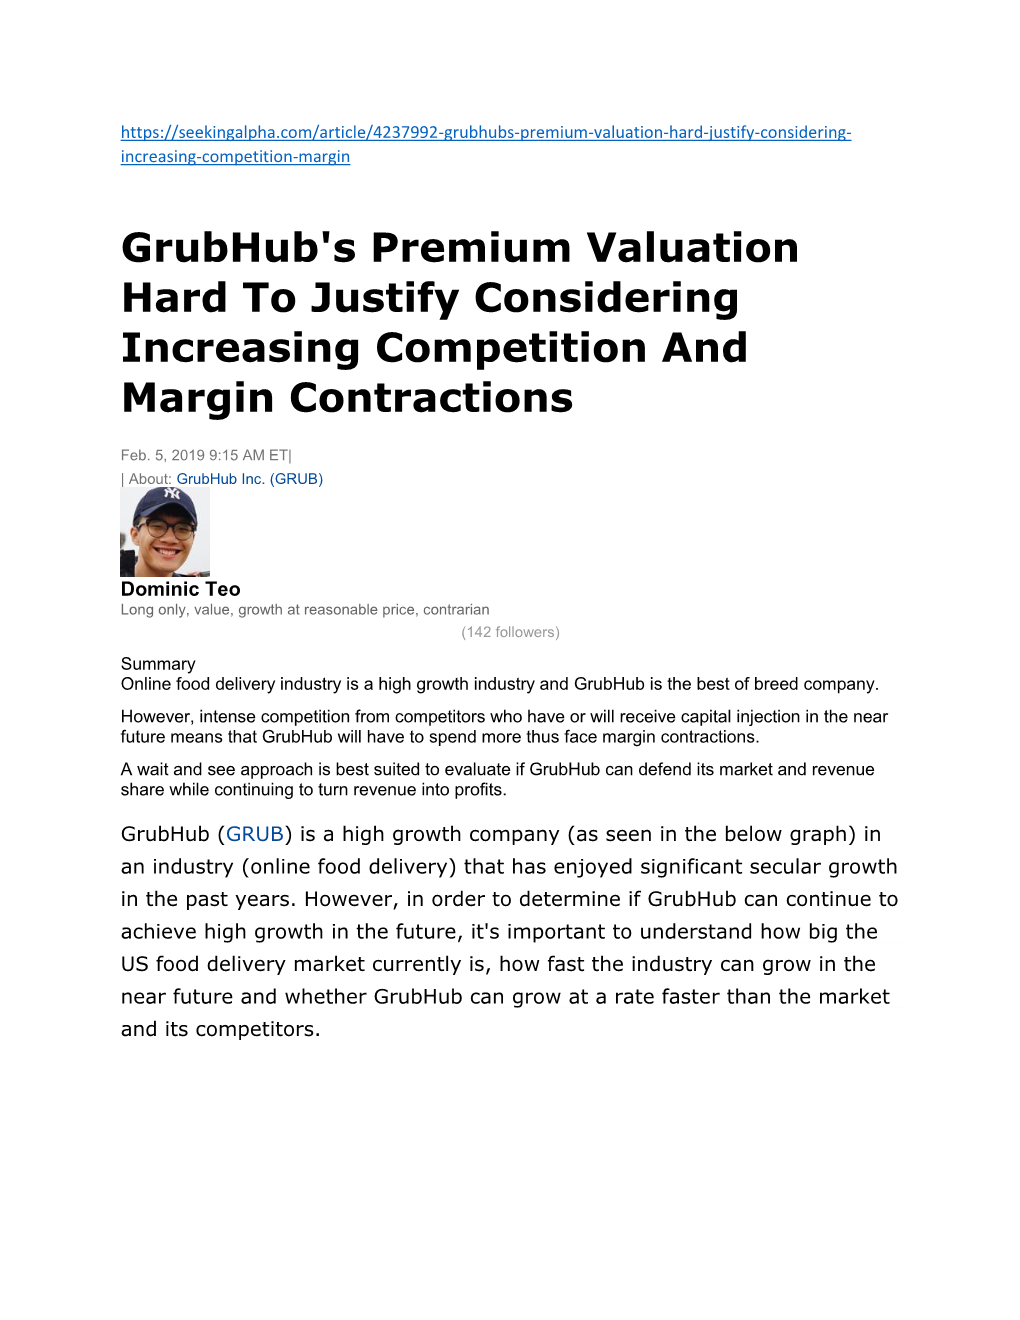 Grubhub's Premium Valuation Hard to Justify Considering Increasing Competition and Margin Contractions